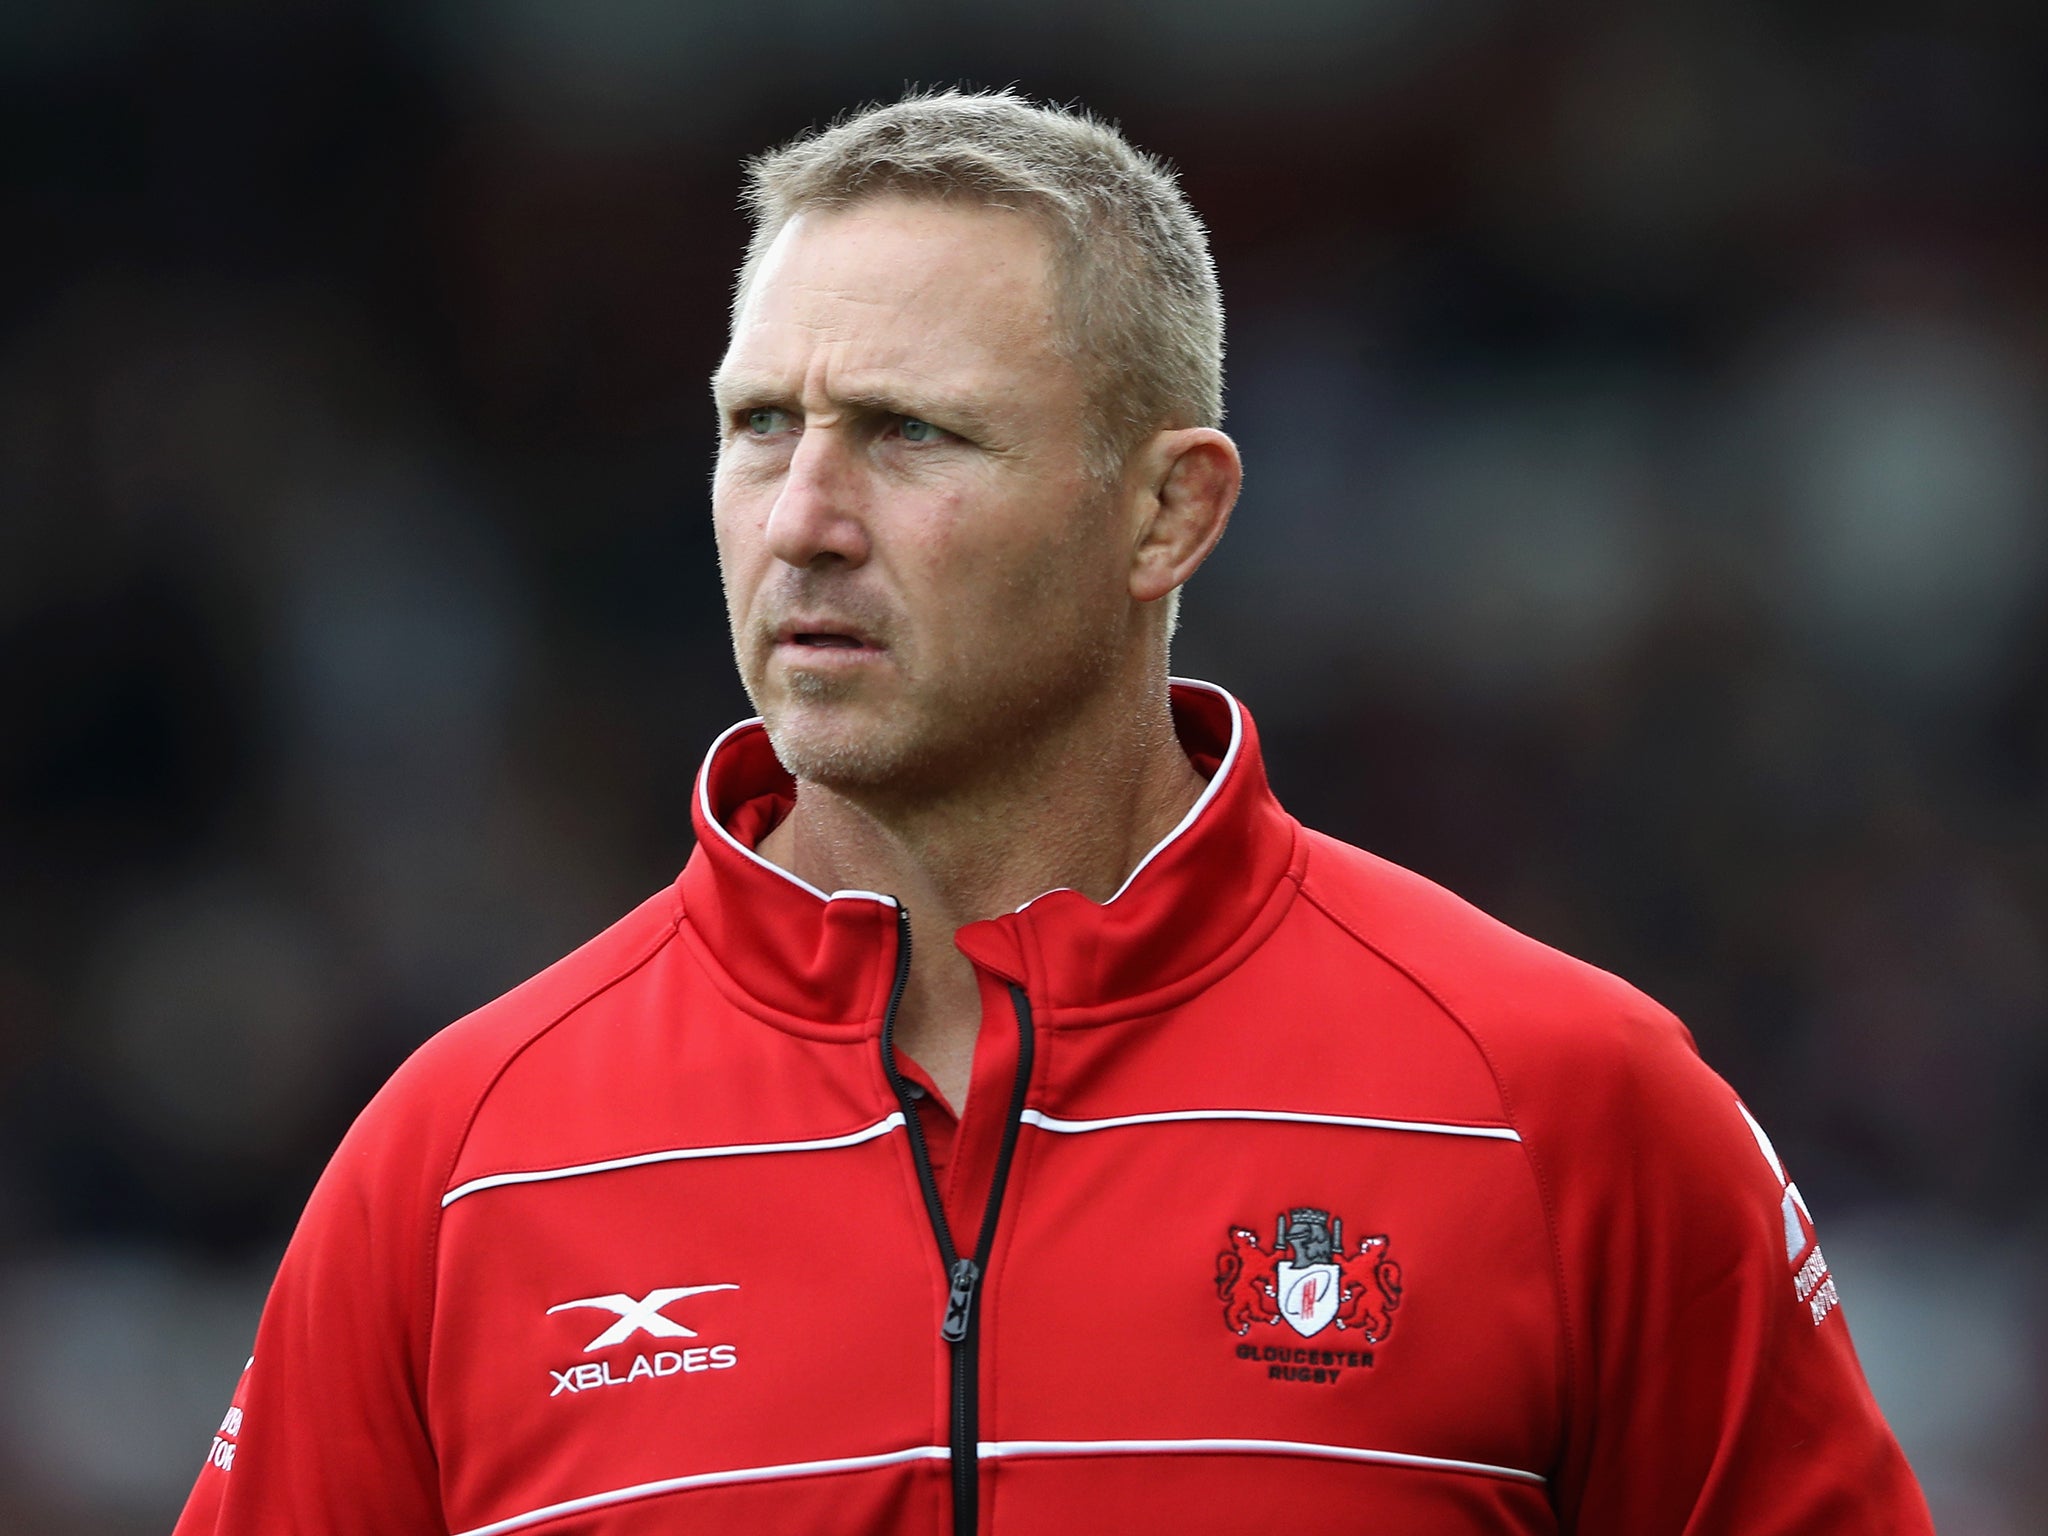 Johan Ackermann is being investigated by police after a man was injured in a nightclub brawl